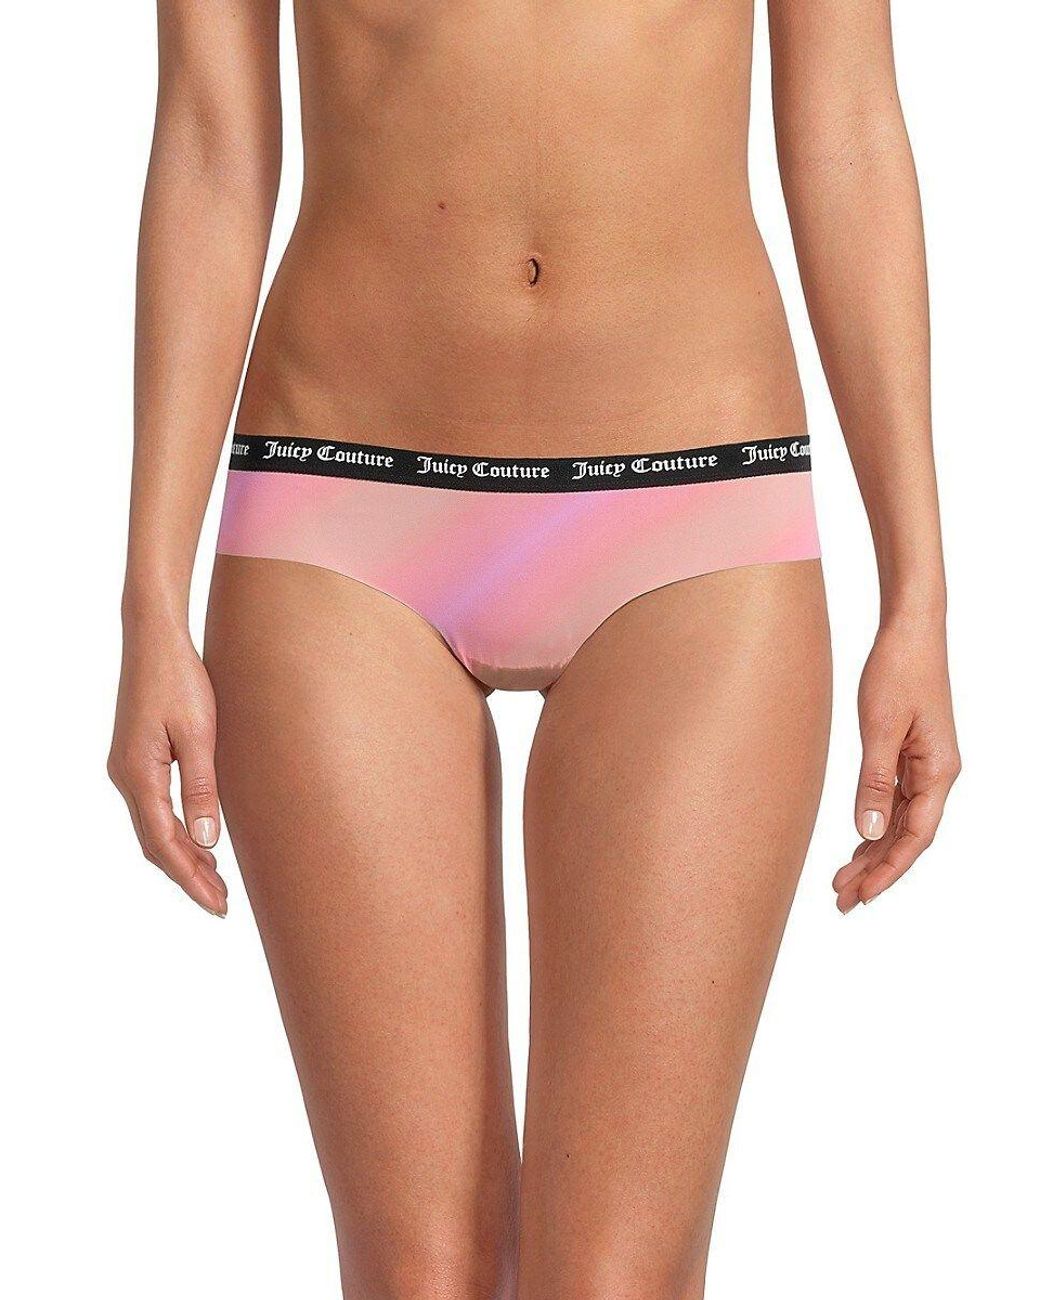 Juicy Couture intimates underwear 5pack panties size small